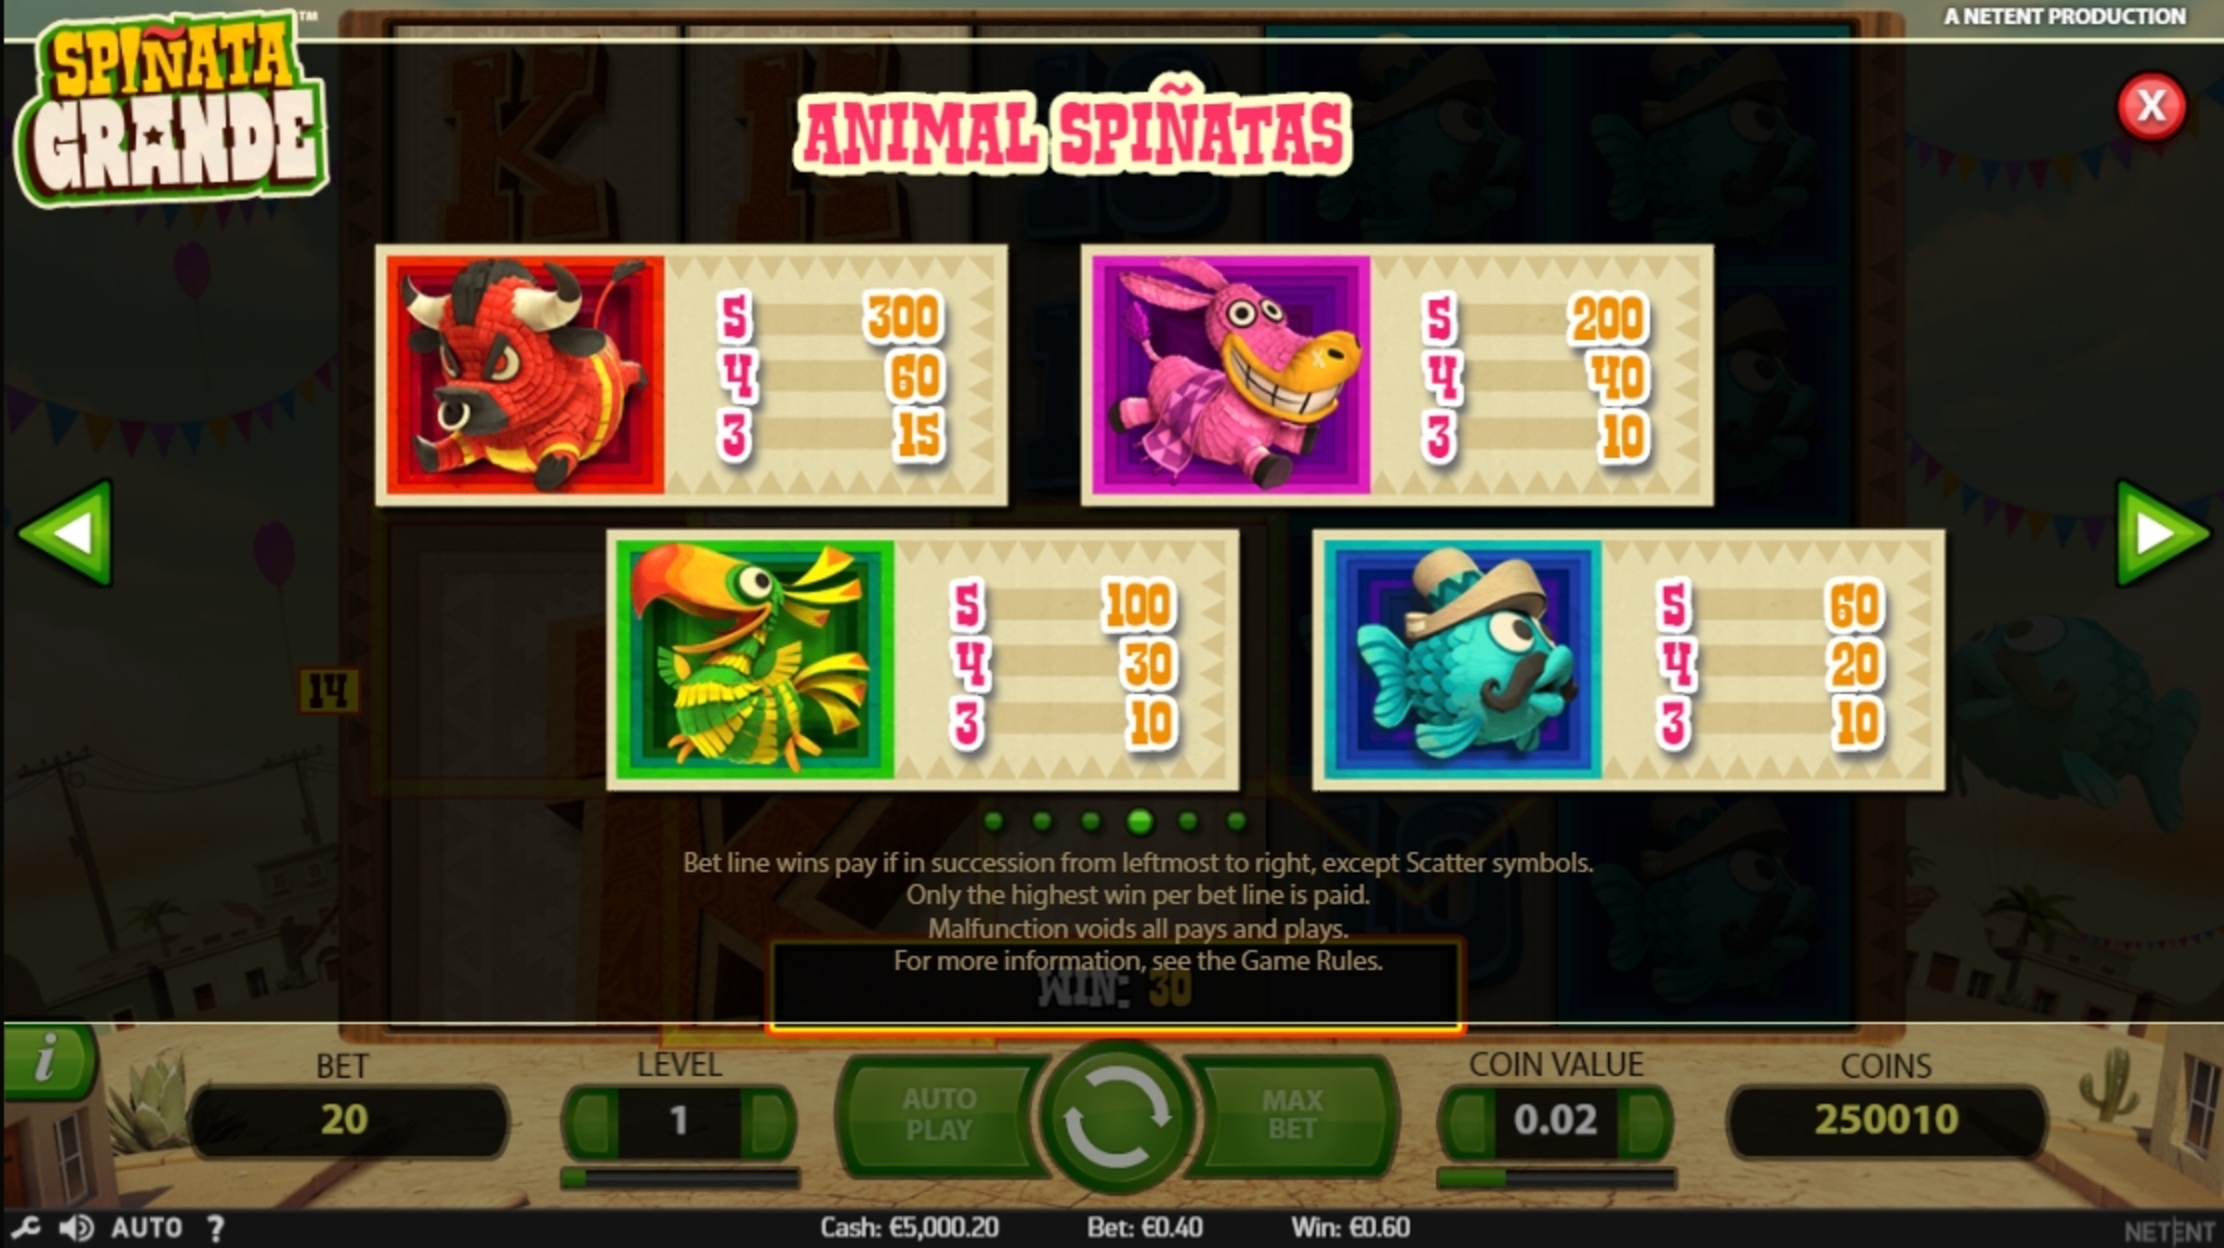 Info of Spinata Grande Slot Game by NetEnt